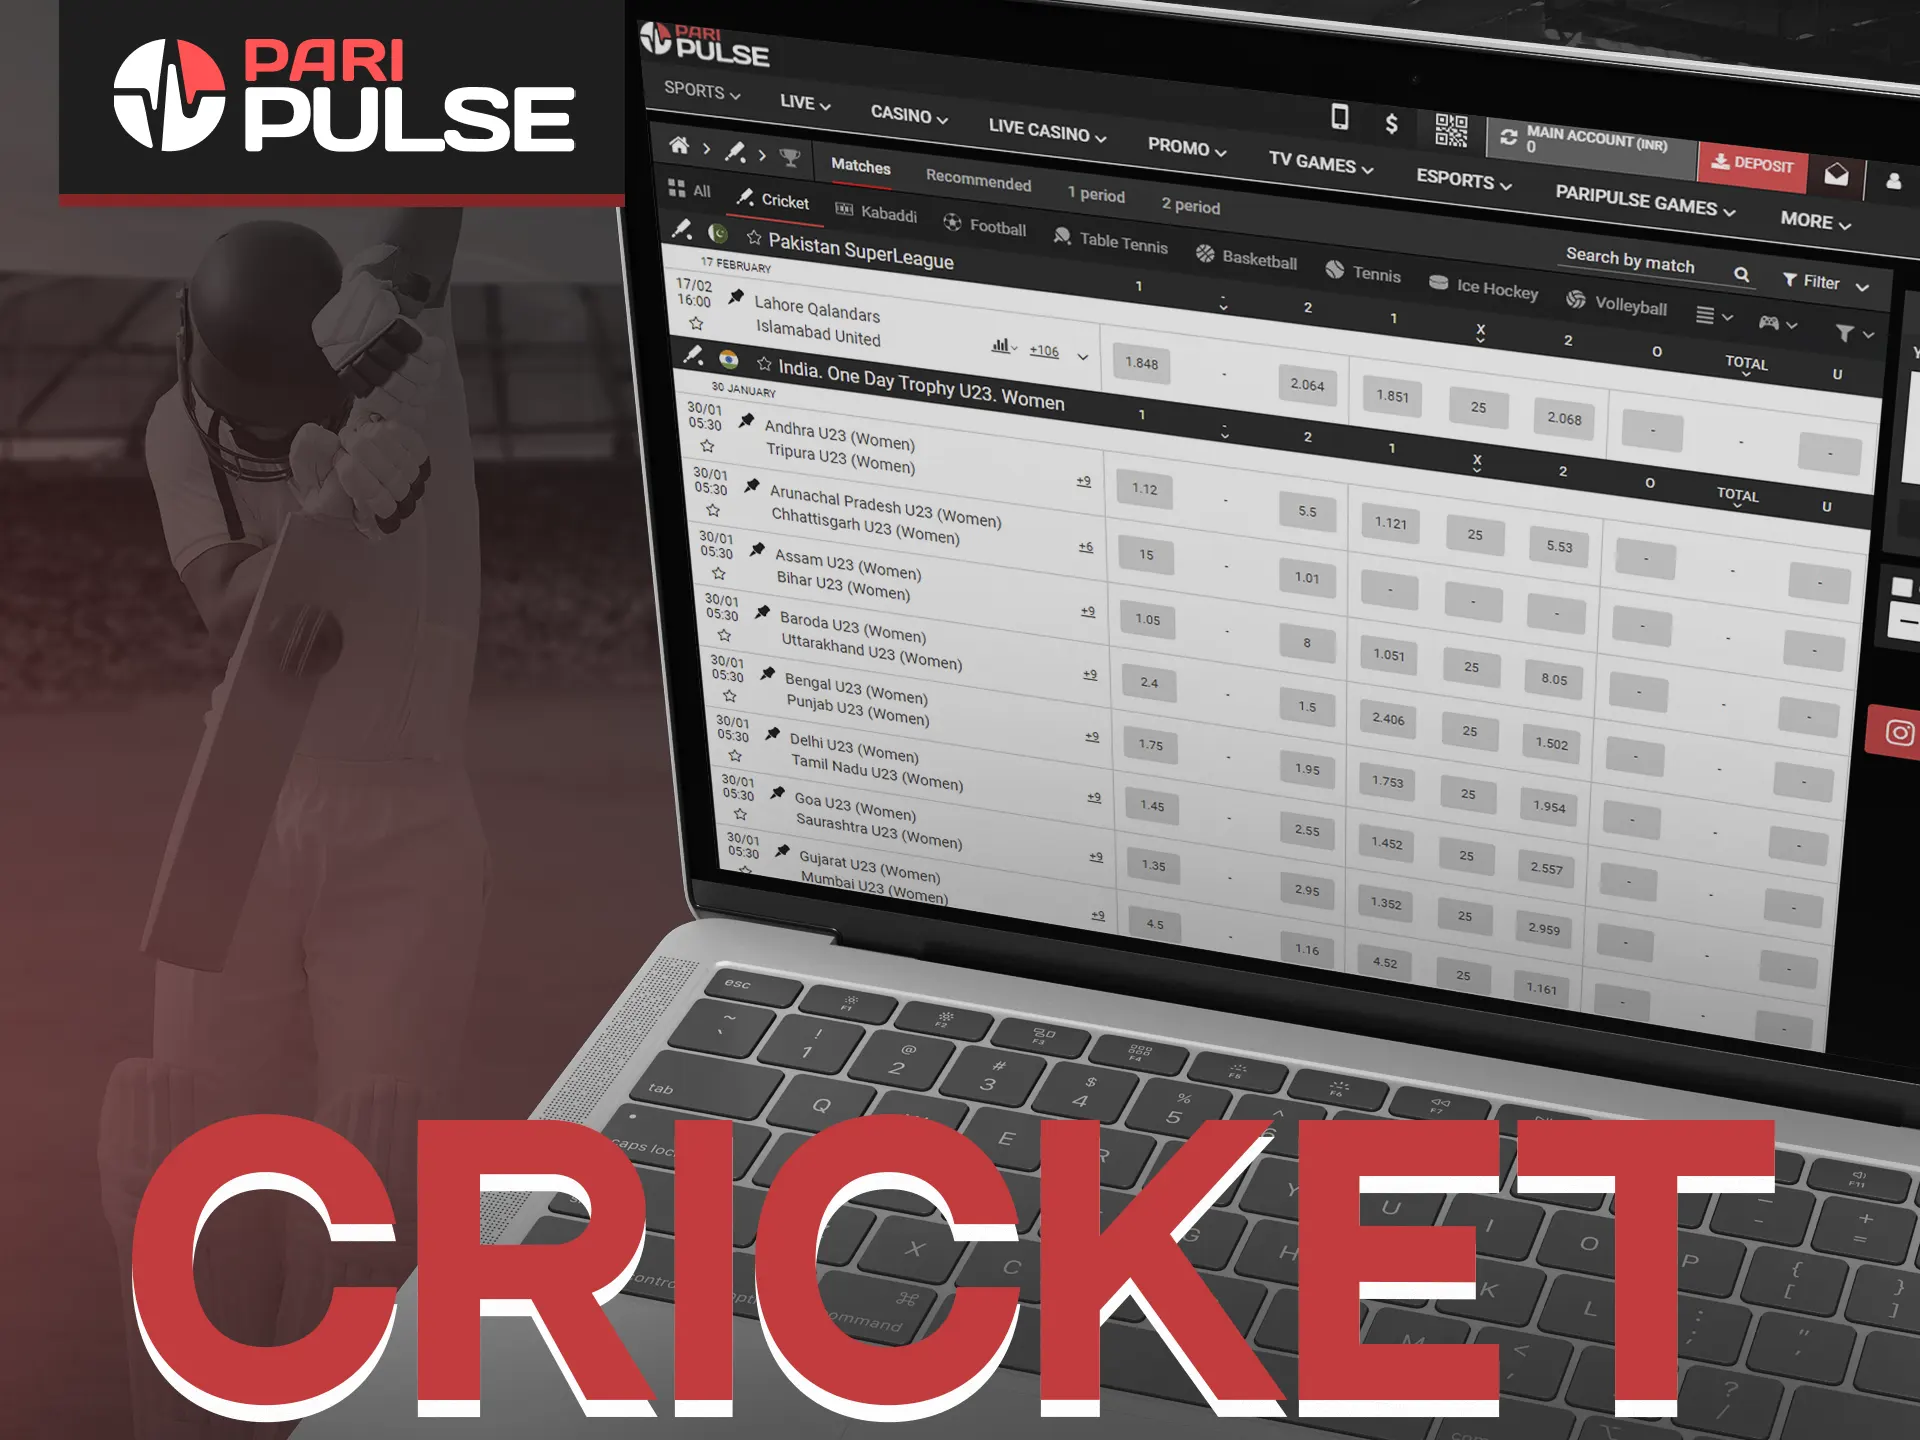 Place your cricket bets with PariPulse.